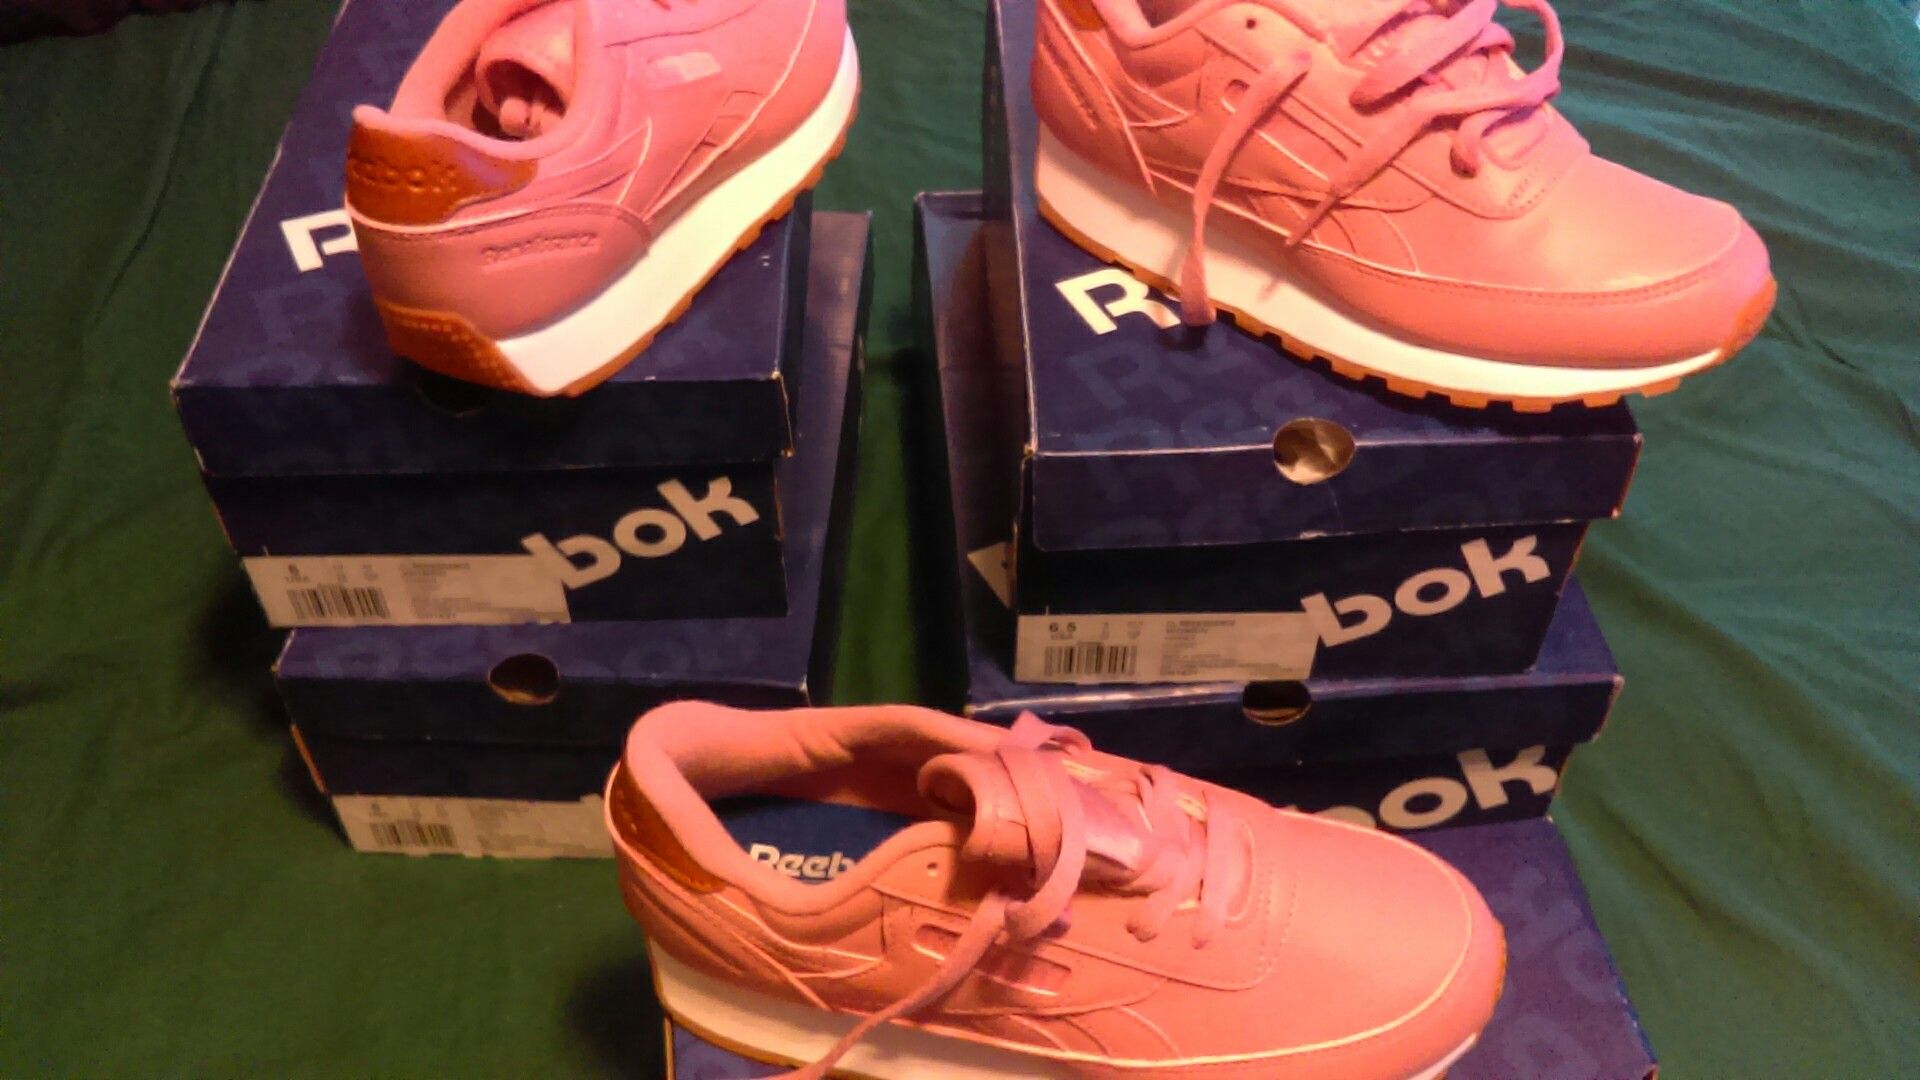 Reebok classic for ladys